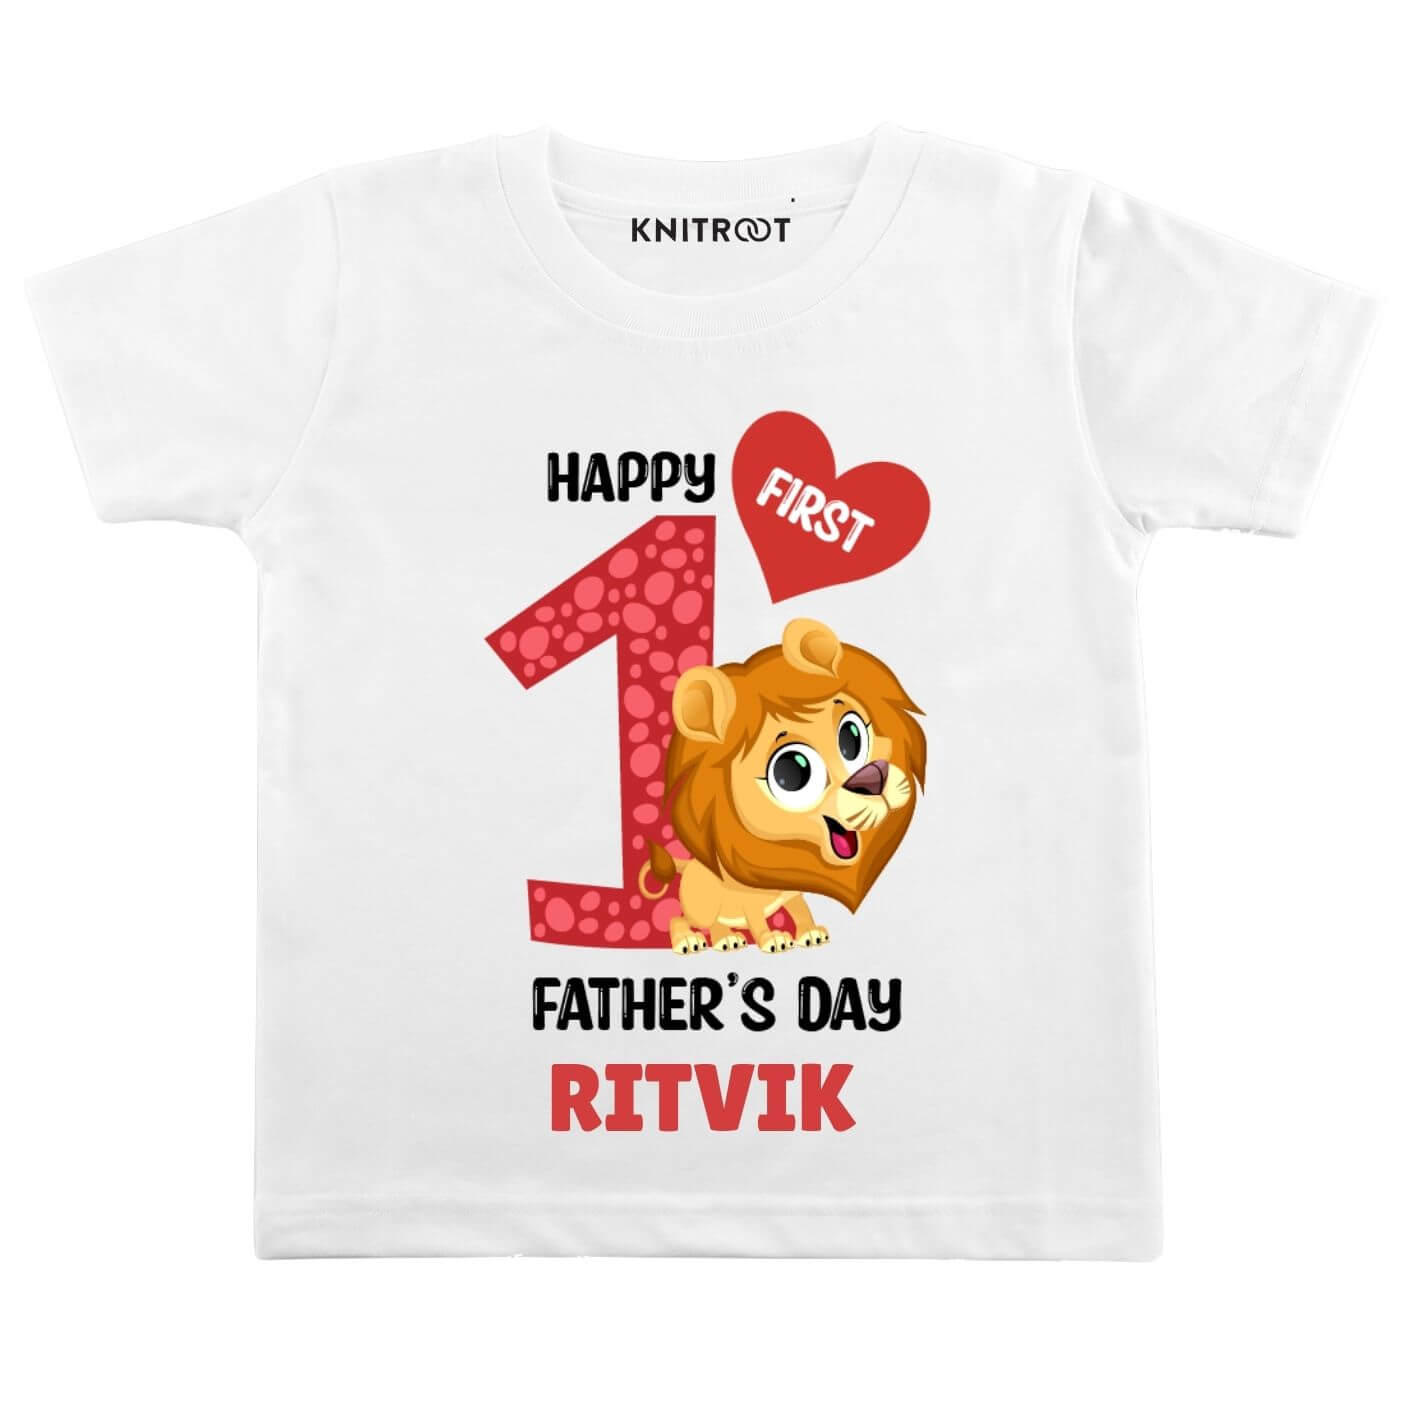 First gifts from baby to dadfrom baby to dadday-lion baby wear